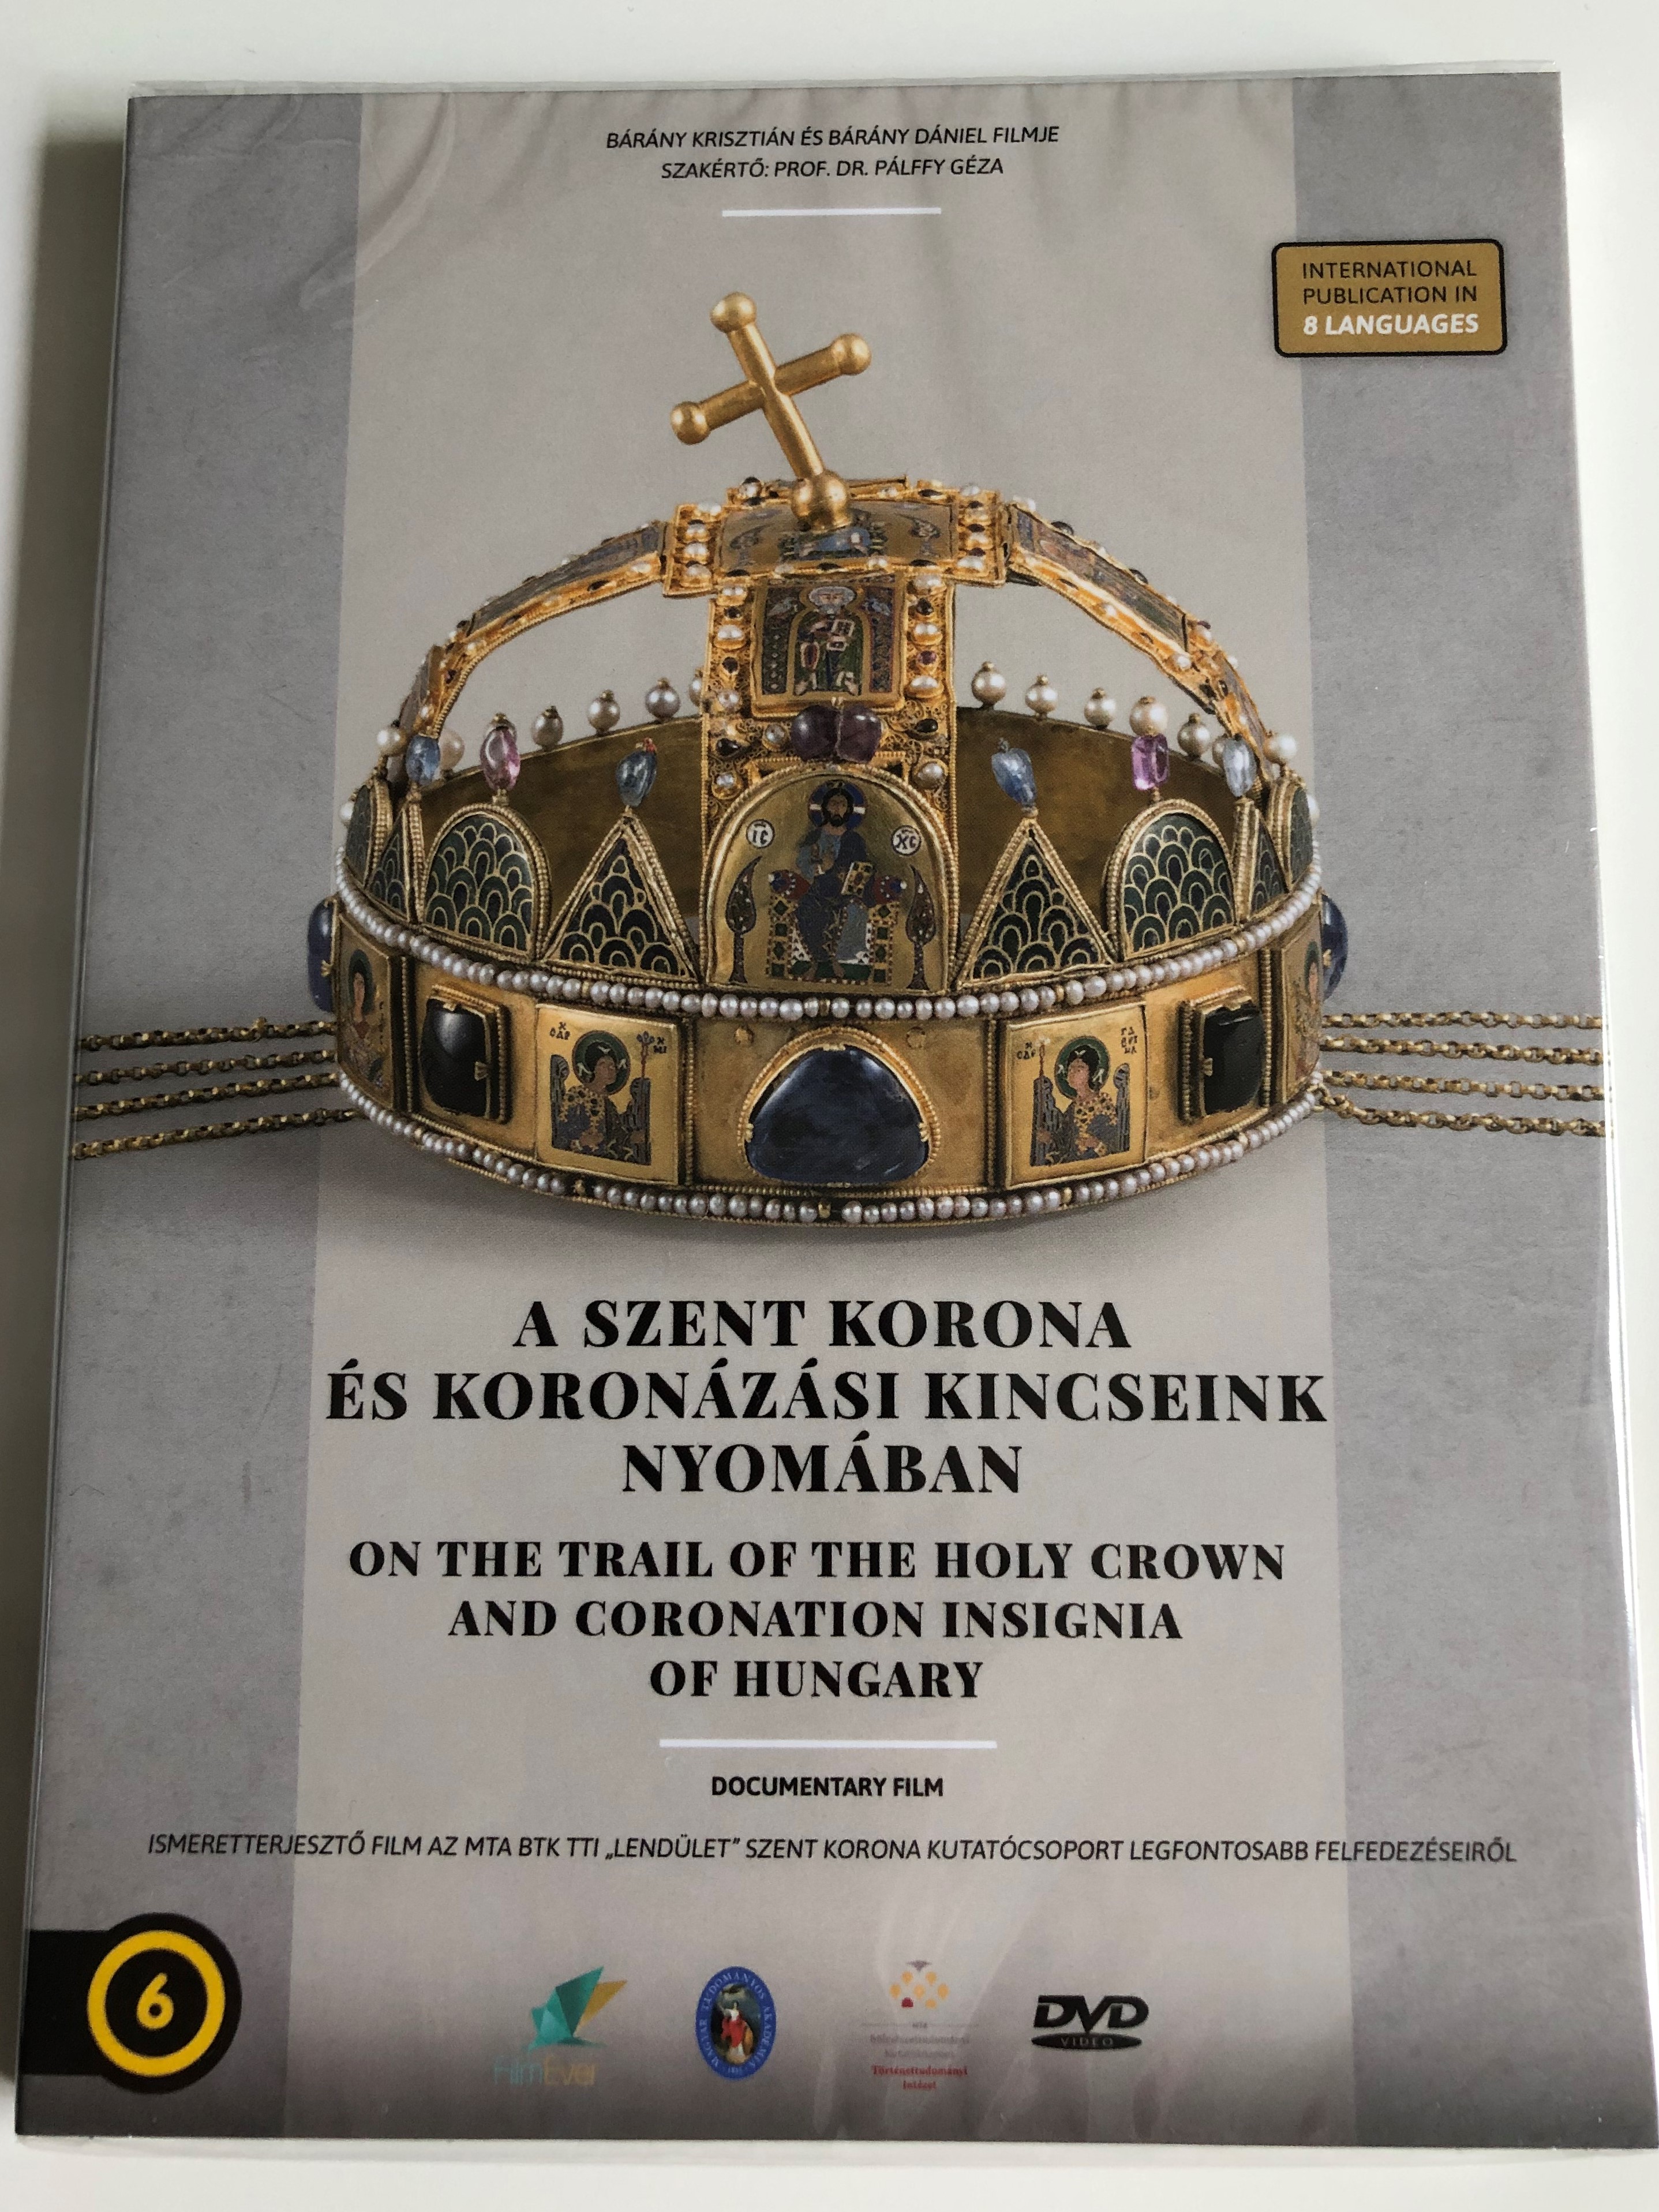 a-szent-korona-s-a-koron-z-si-kincseink-nyom-ban-dvd-2016-on-the-trail-of-the-holy-crown-and-coronation-insignia-of-hungary-directed-by-b-r-ny-kriszti-n-and-b-r-ny-d-niel-mta-btk-documentary-film-international-publication-1-.jpg